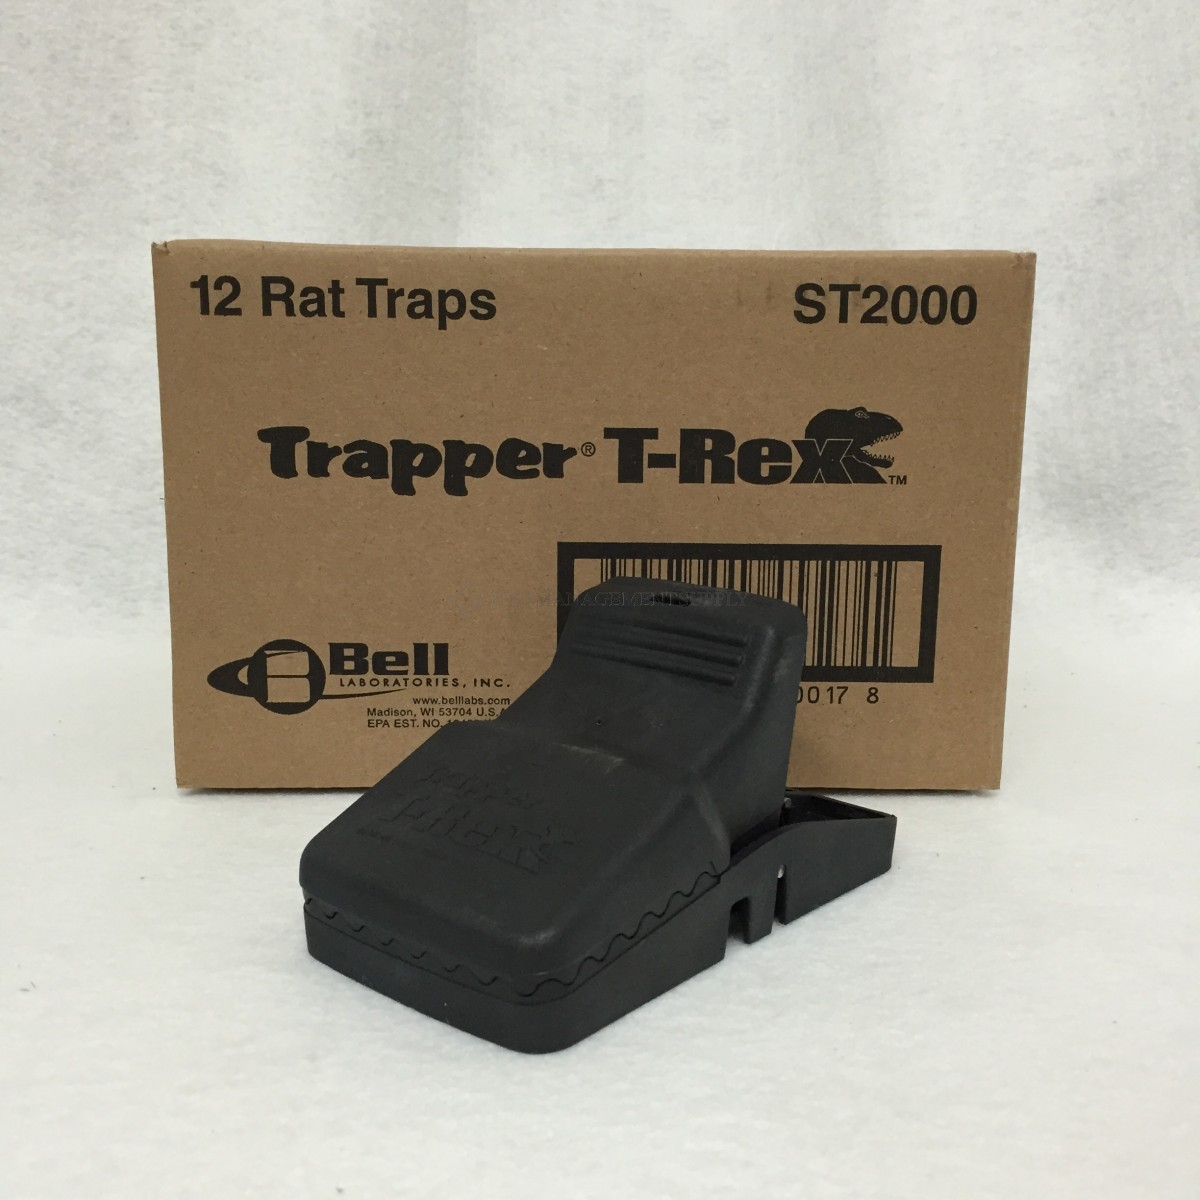 How to Use the Trapper T-Rex Rat Trap 